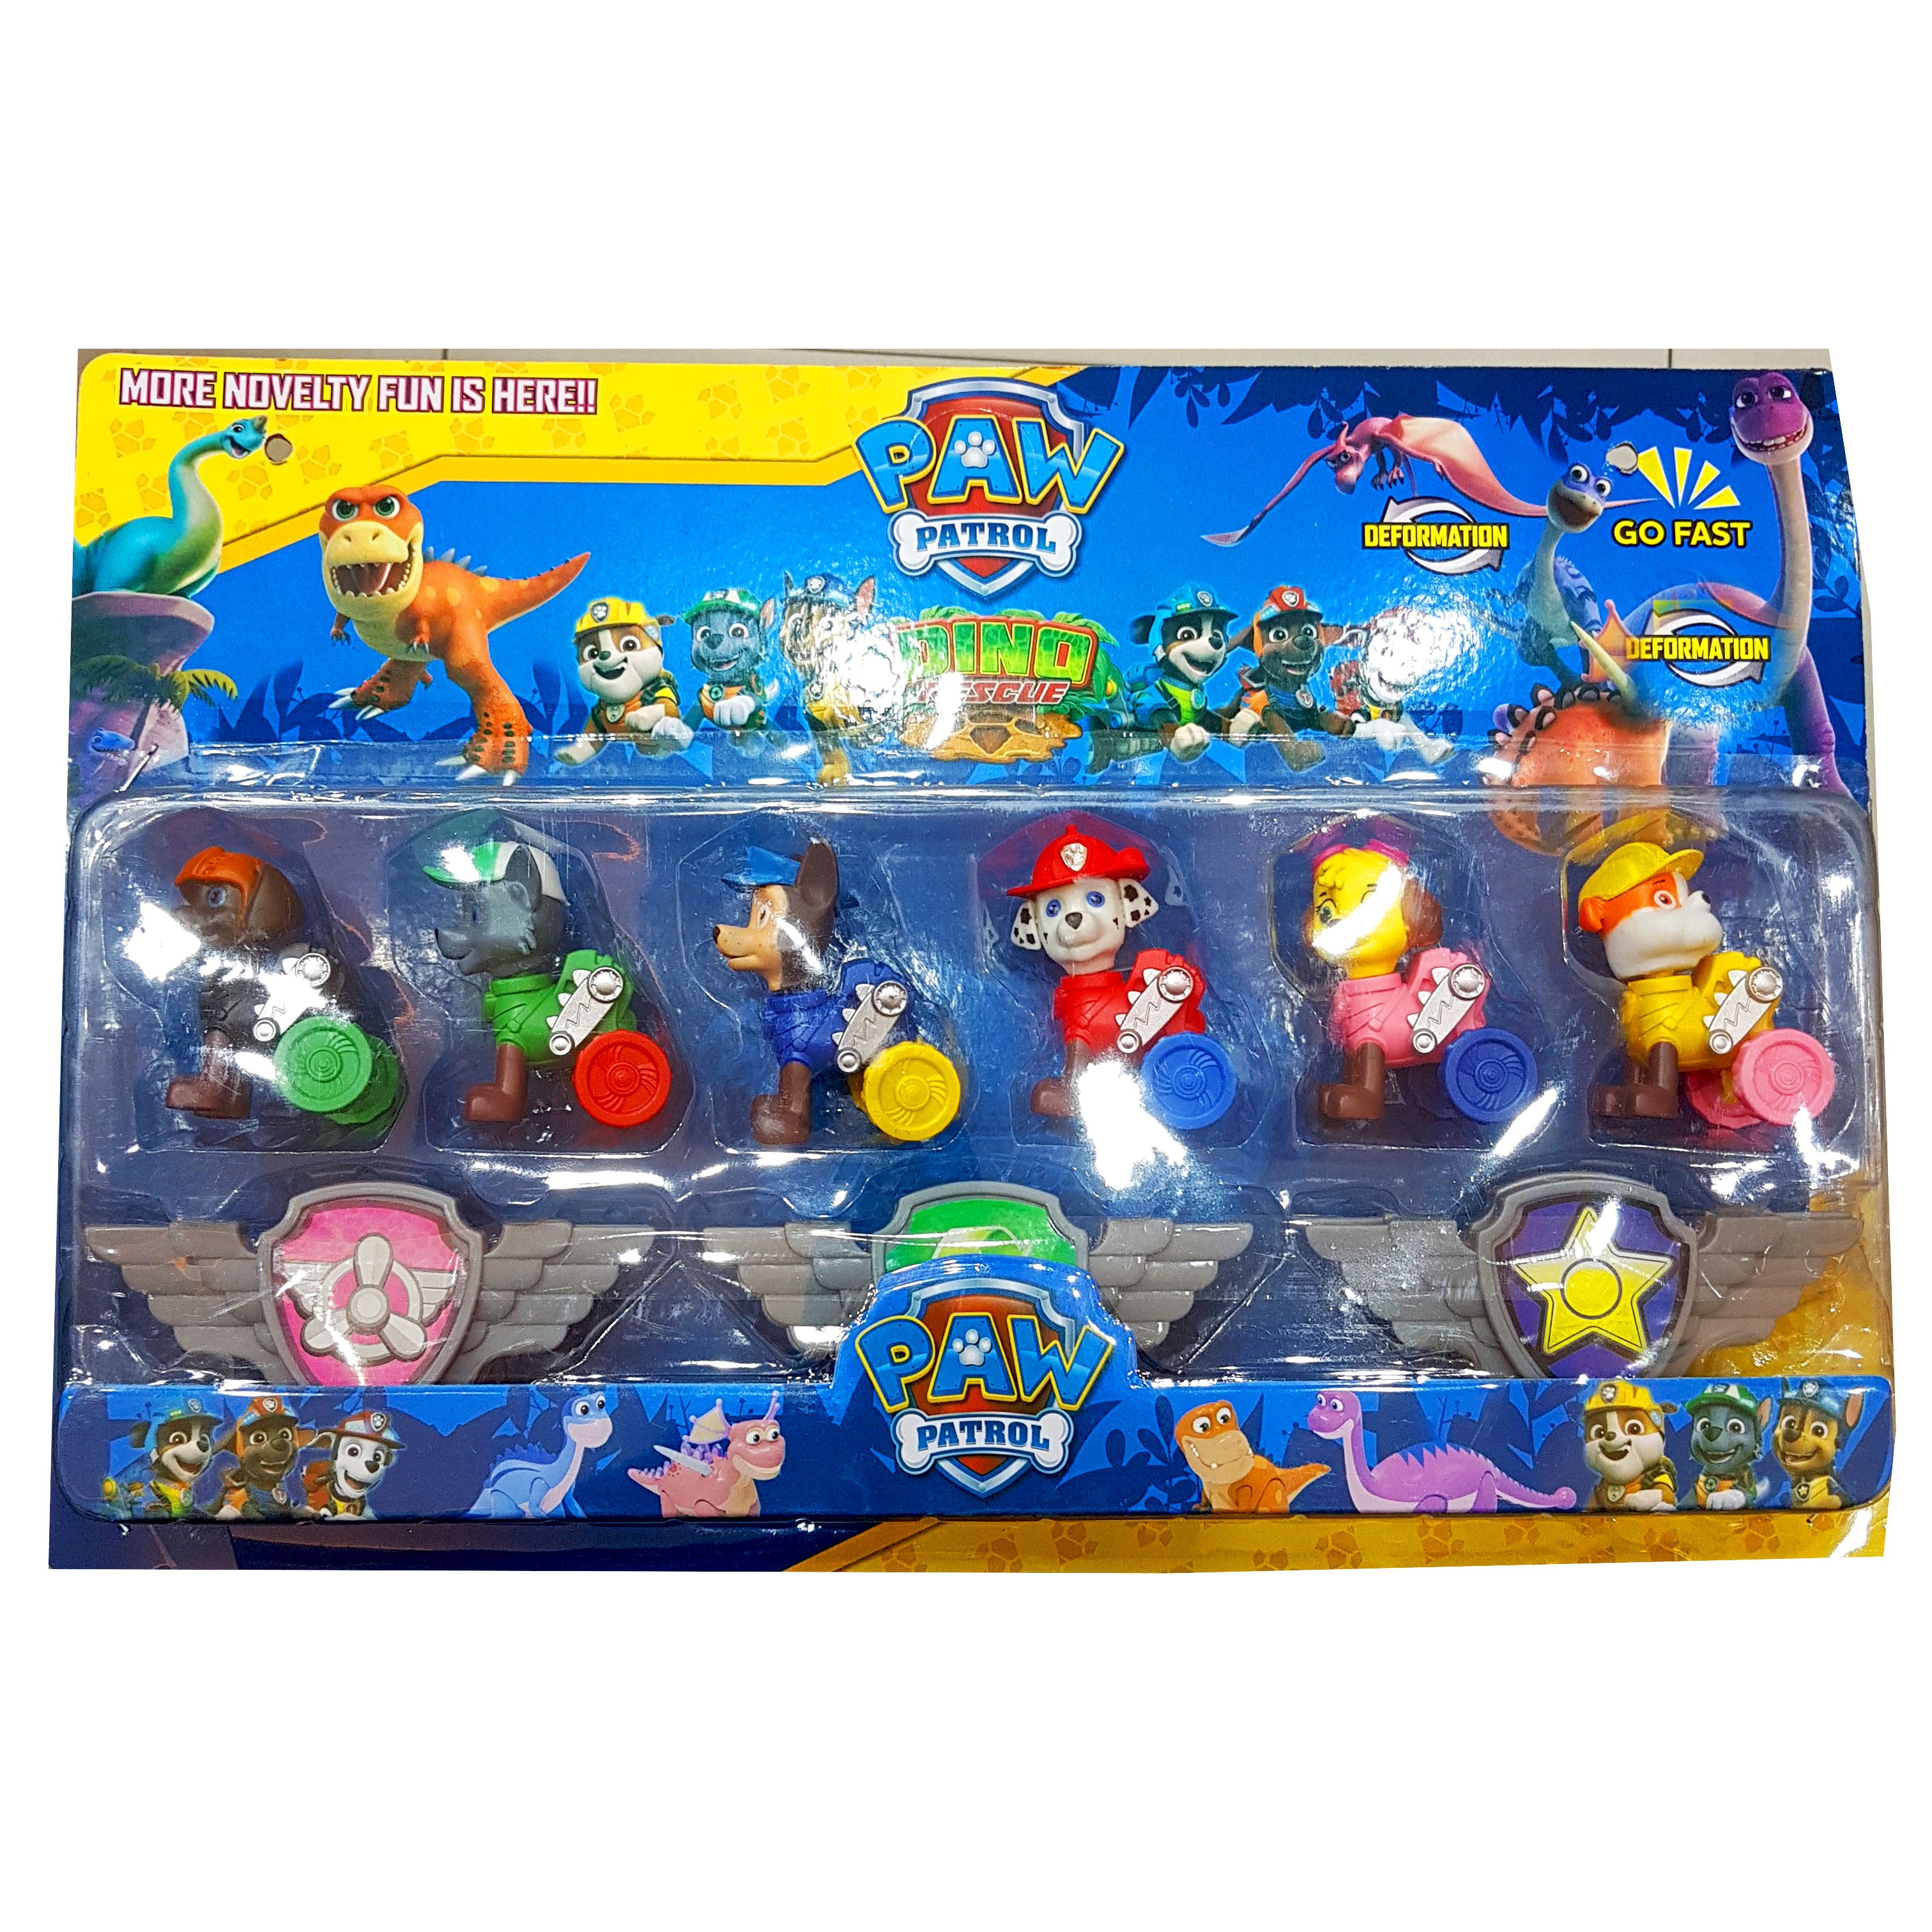 New Arrival: Paw Patrol Action Figure Set for Kids - 6 High-Quality, Movable Figures - Top Gift for Paw Patrol Enthusiasts, Best Seller